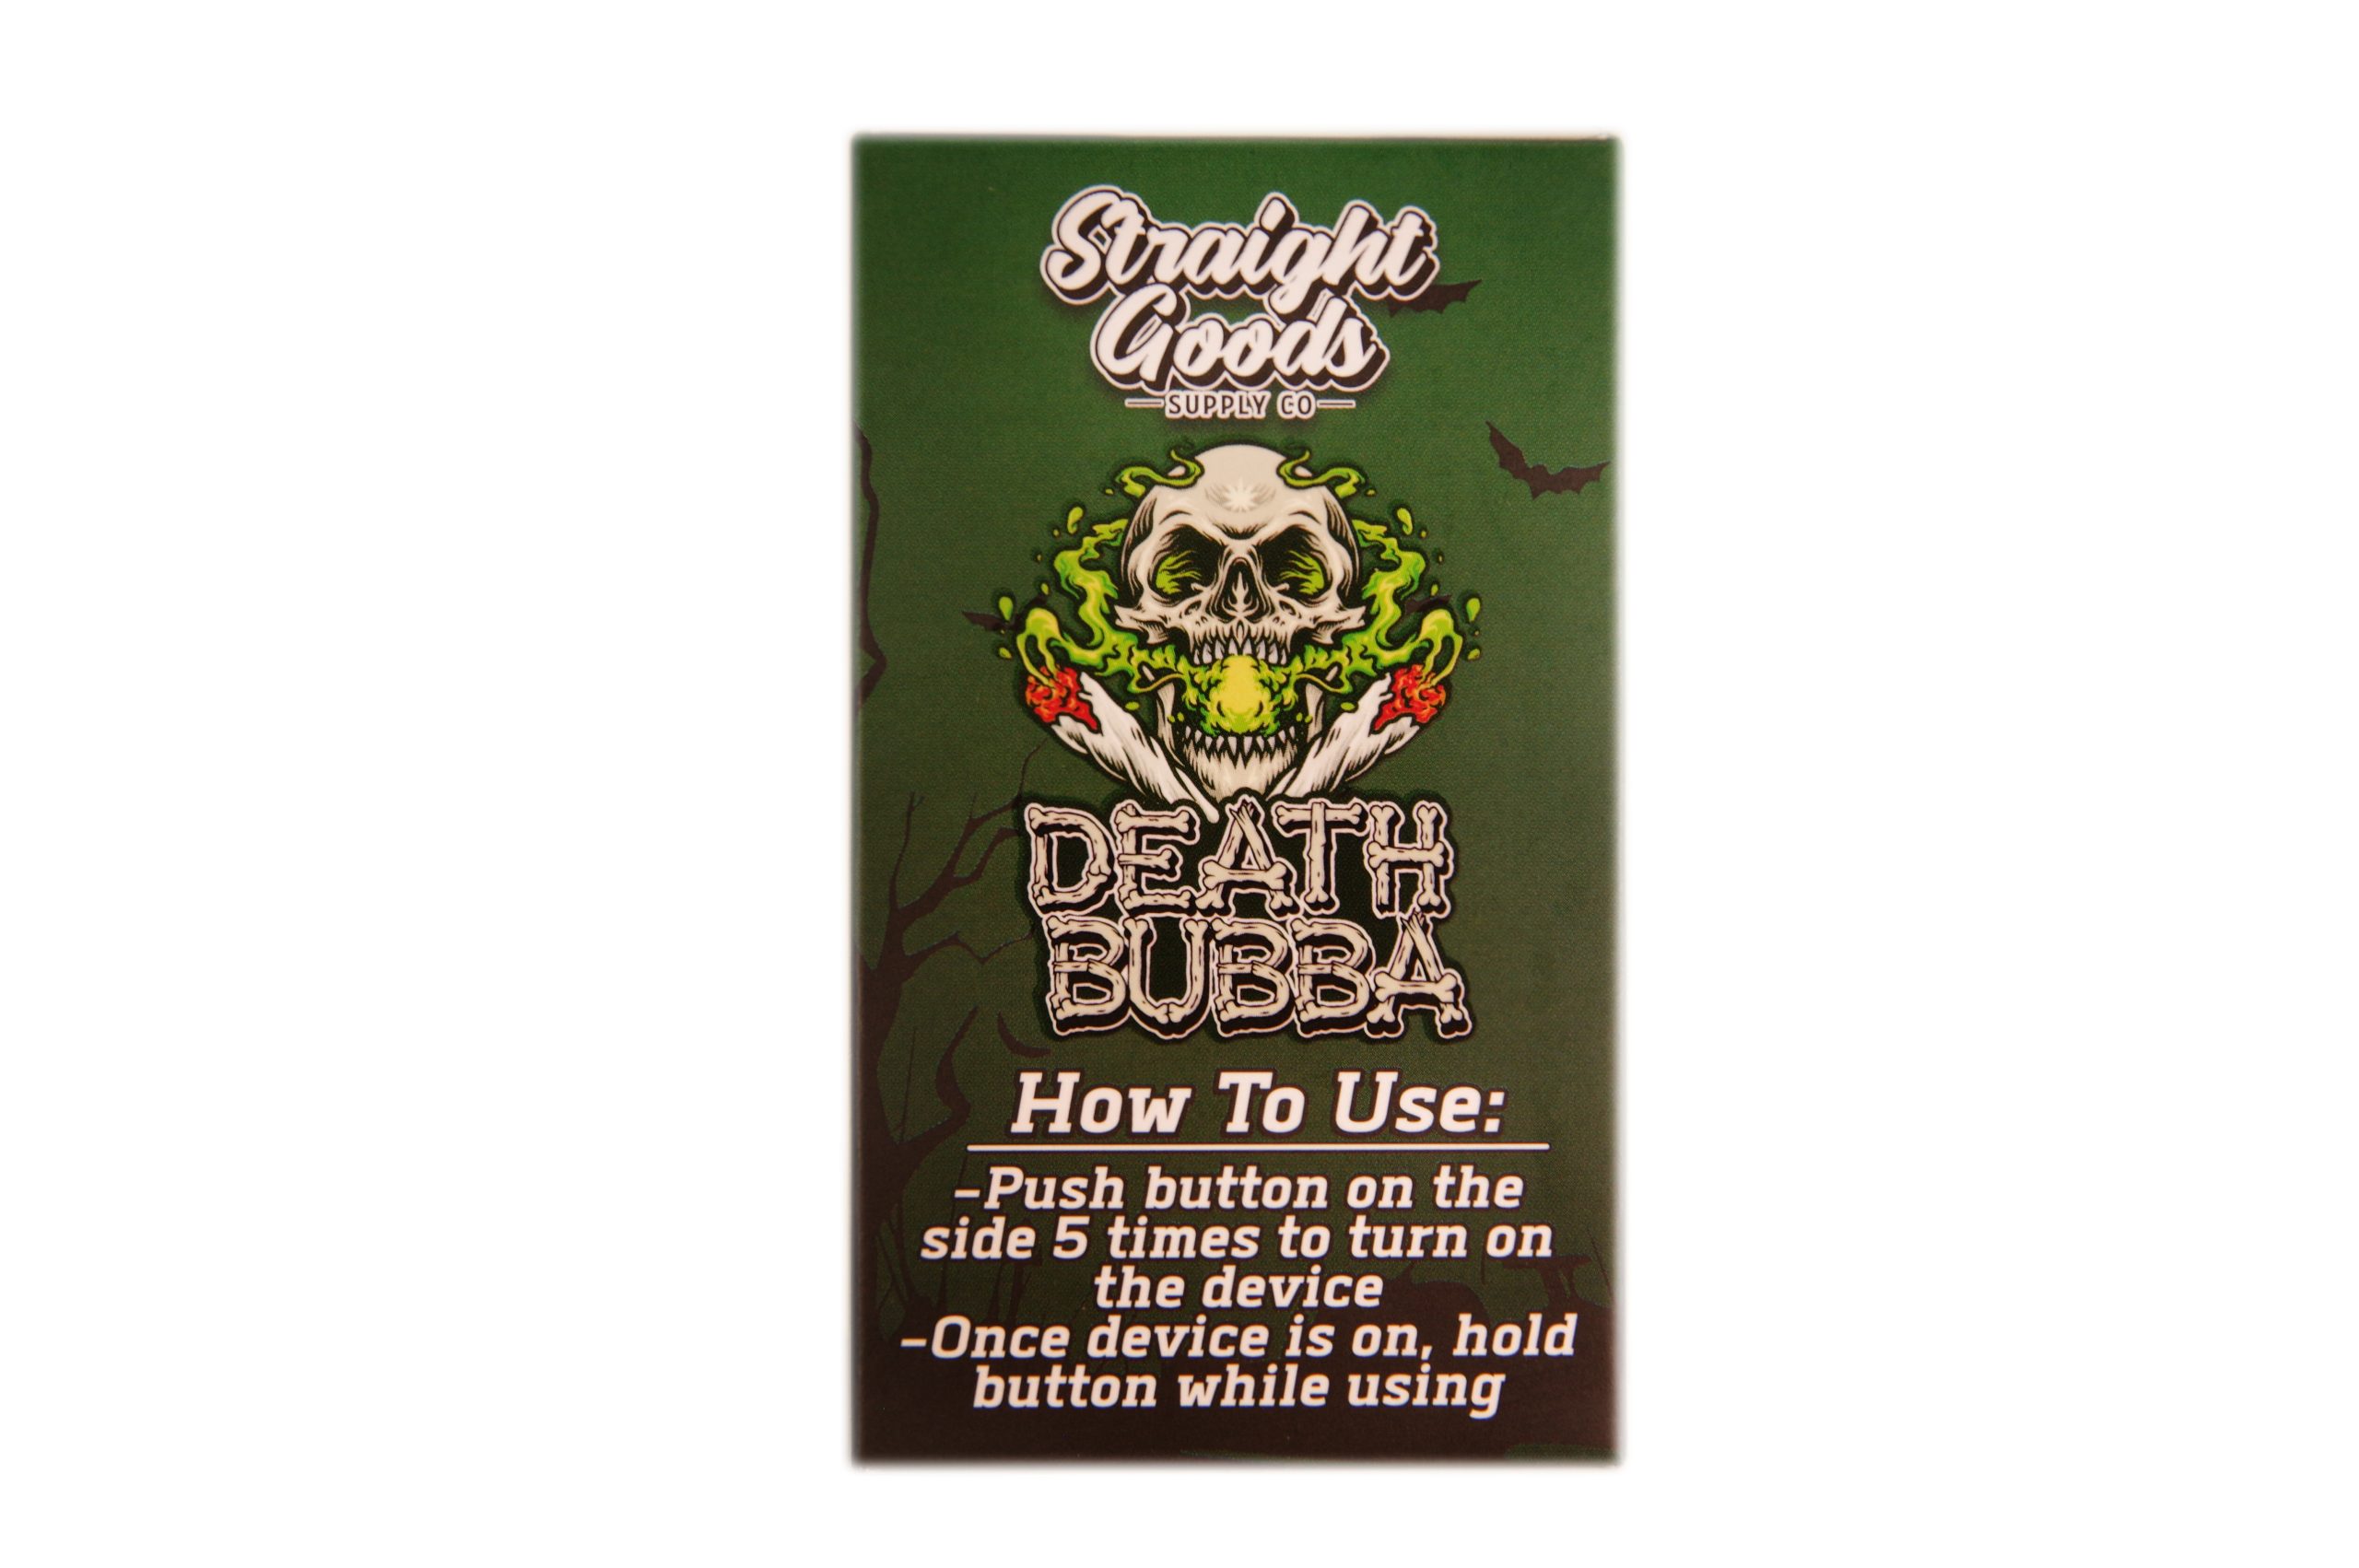 Buy Straight Goods – Death Bubba 3G Disposable Pen online Canada